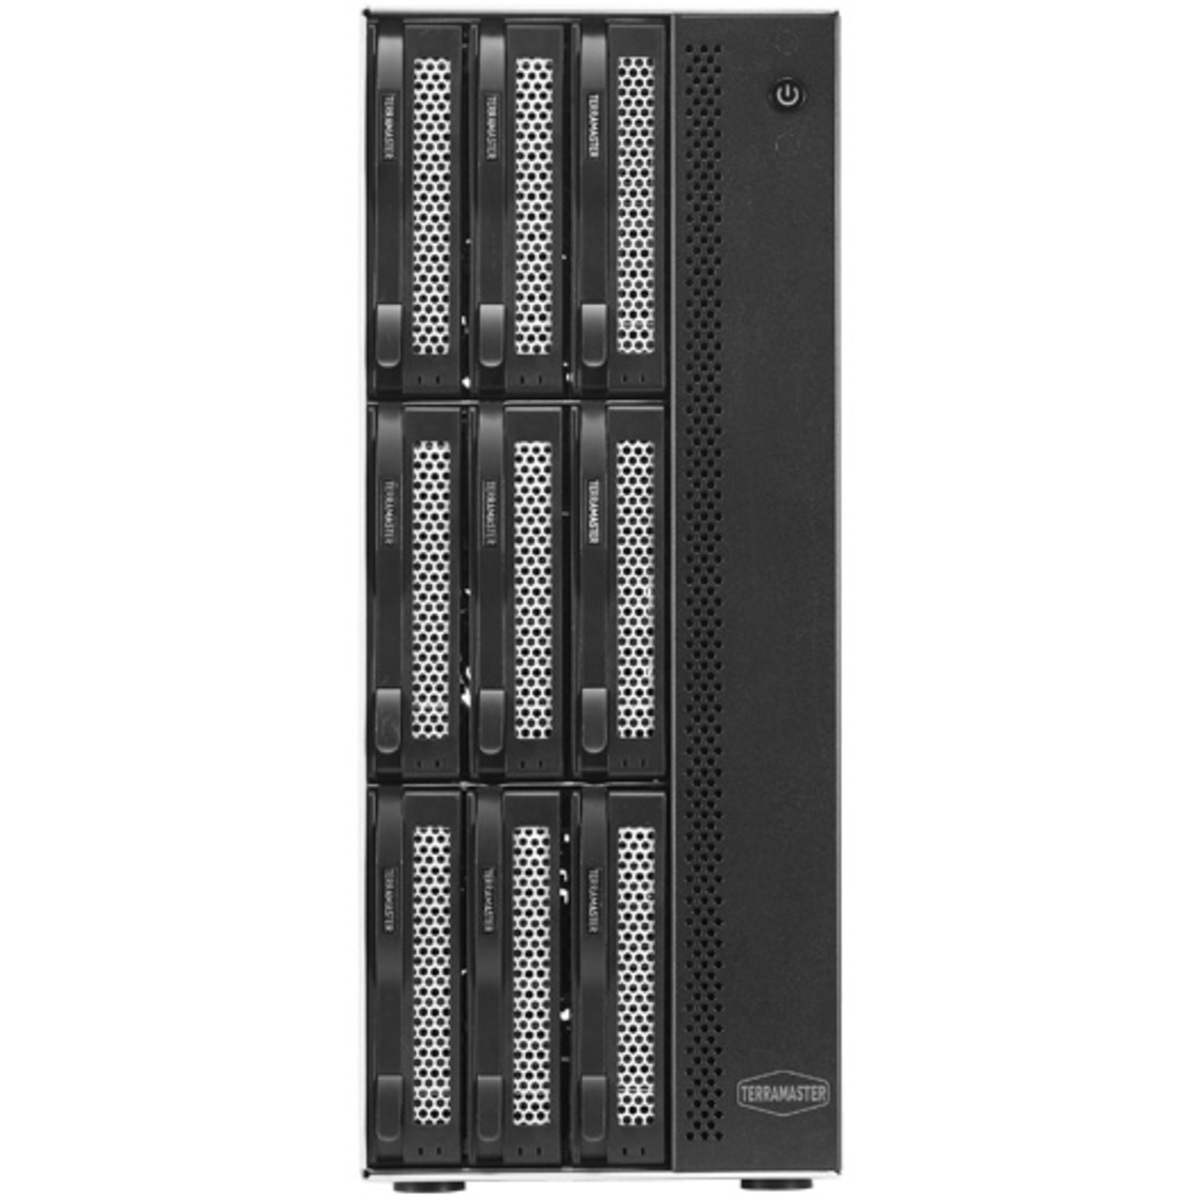 TerraMaster T9-423 42tb 9-Bay Desktop Multimedia / Power User / Business NAS - Network Attached Storage Device 7x6tb Western Digital Red Plus WD60EFPX 3.5 5640rpm SATA 6Gb/s HDD NAS Class Drives Installed - Burn-In Tested T9-423